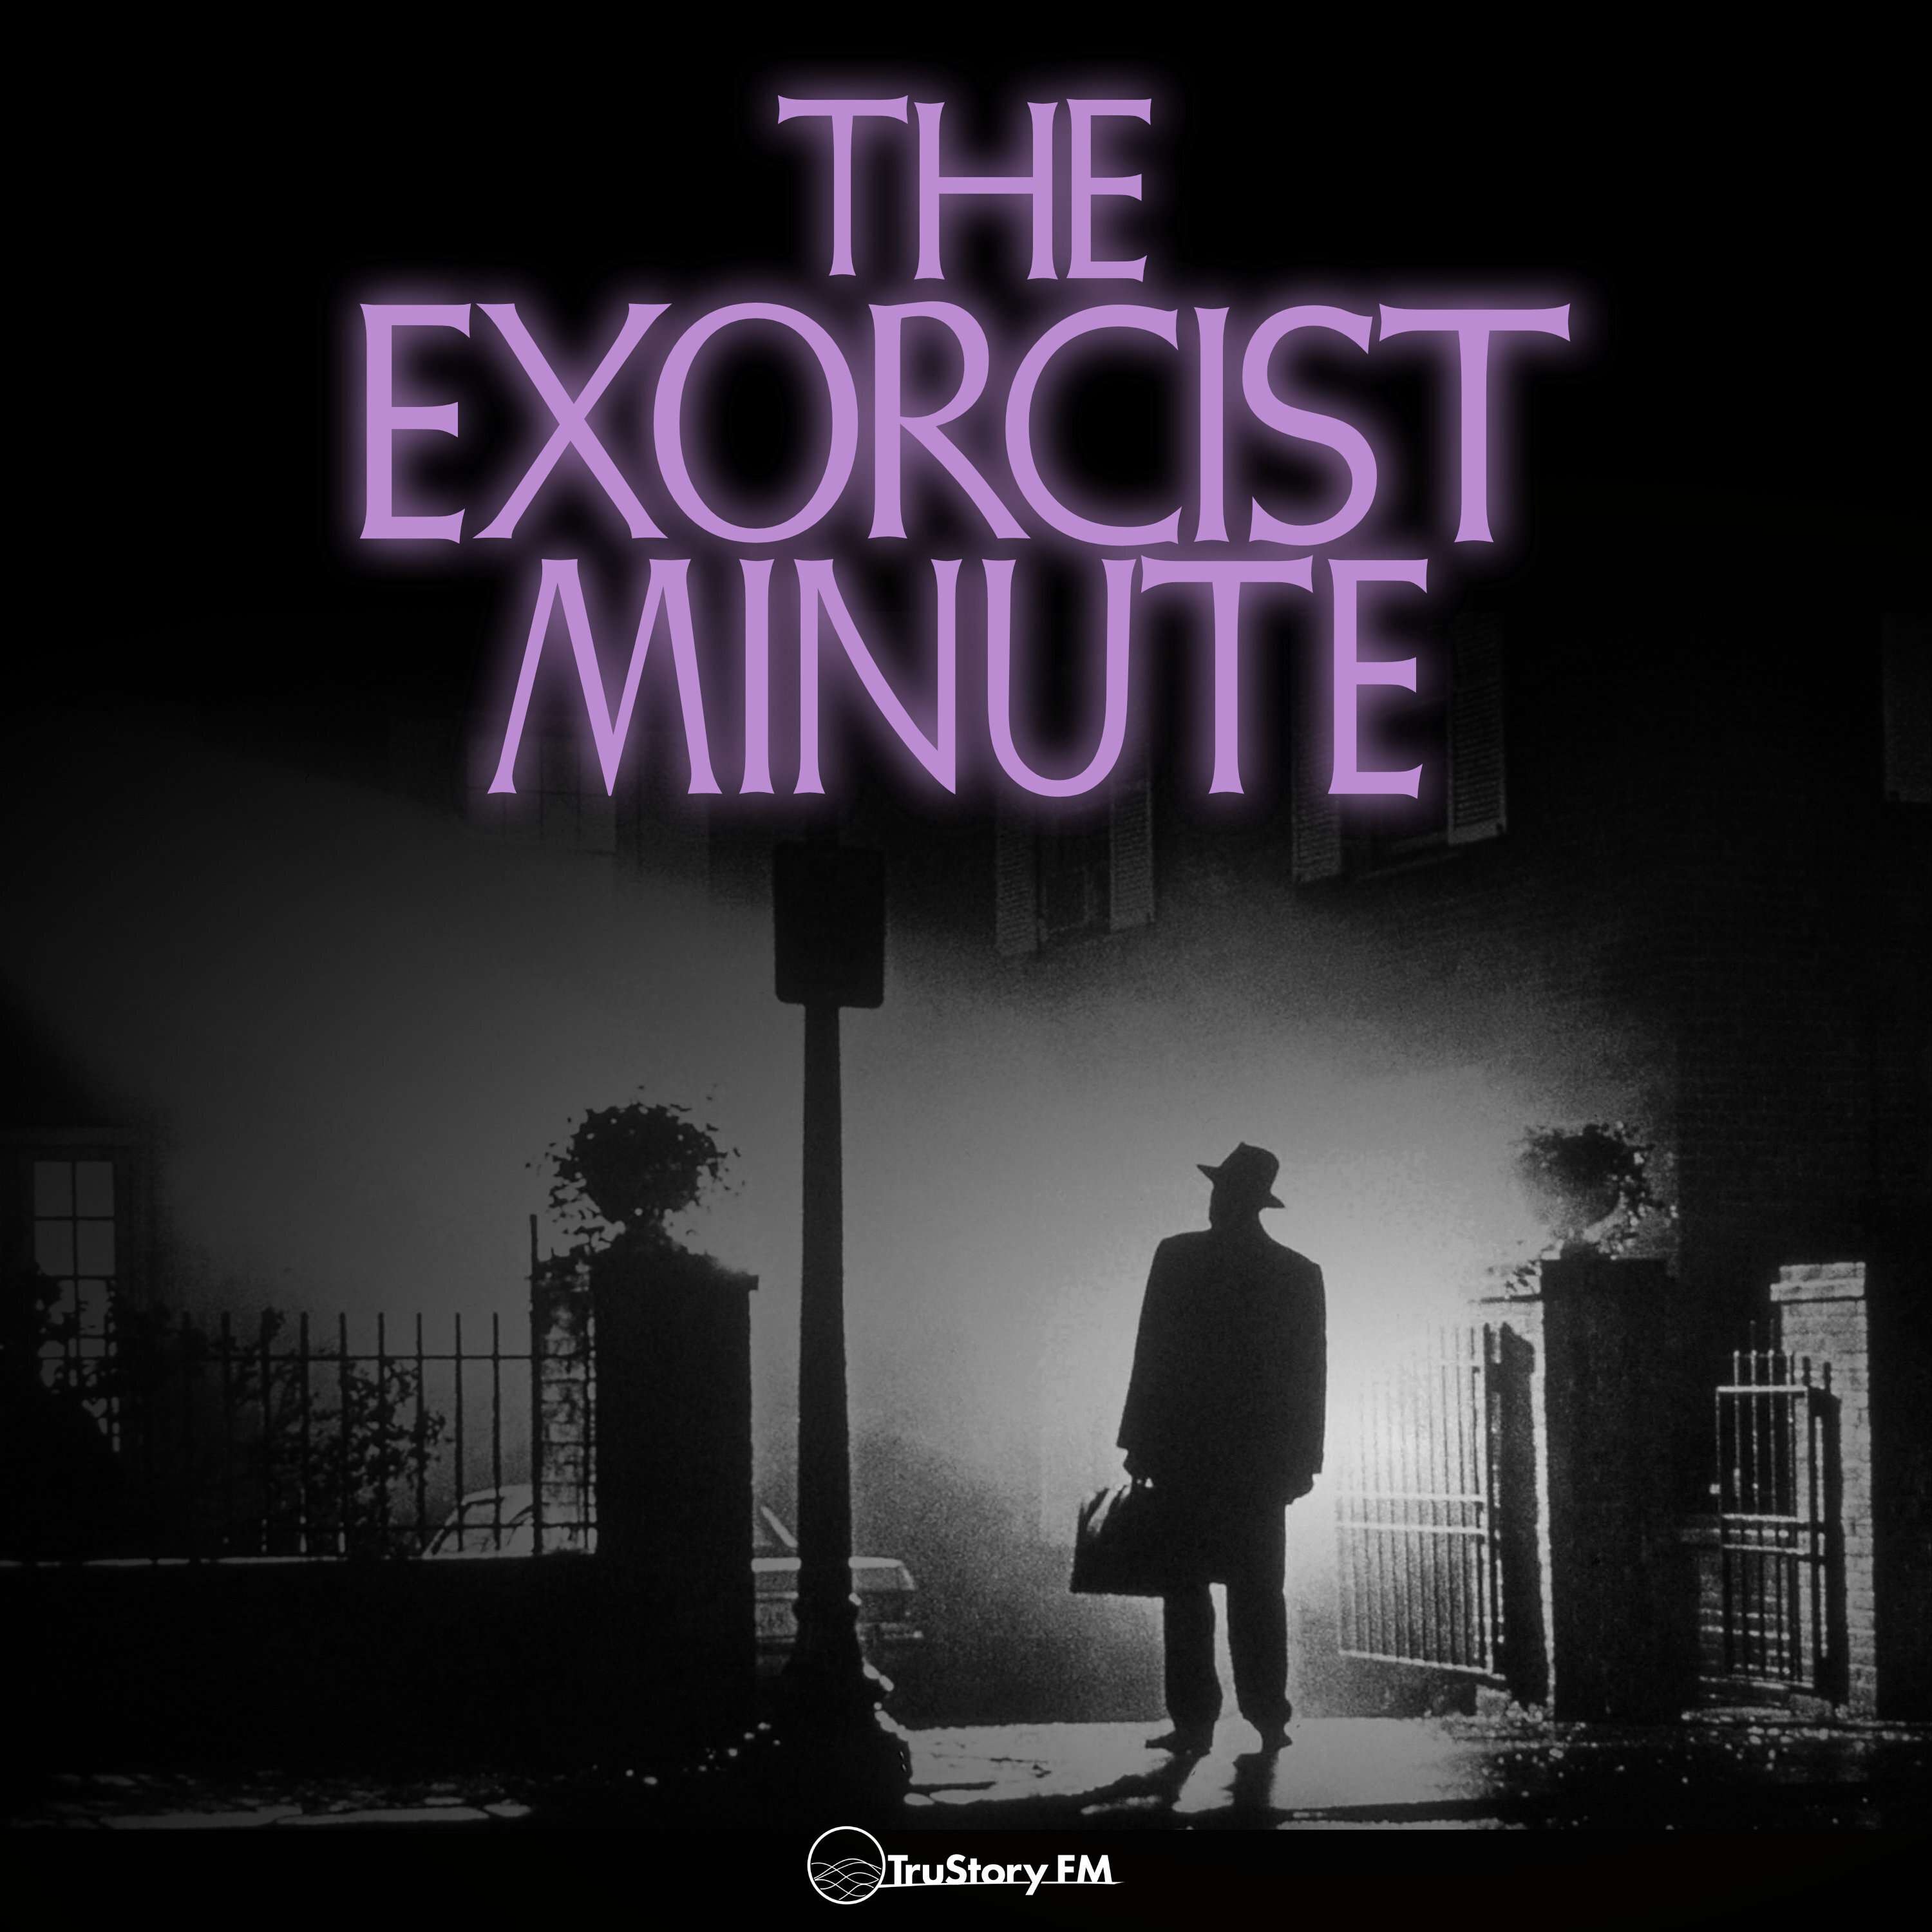 The Exorcist Minute